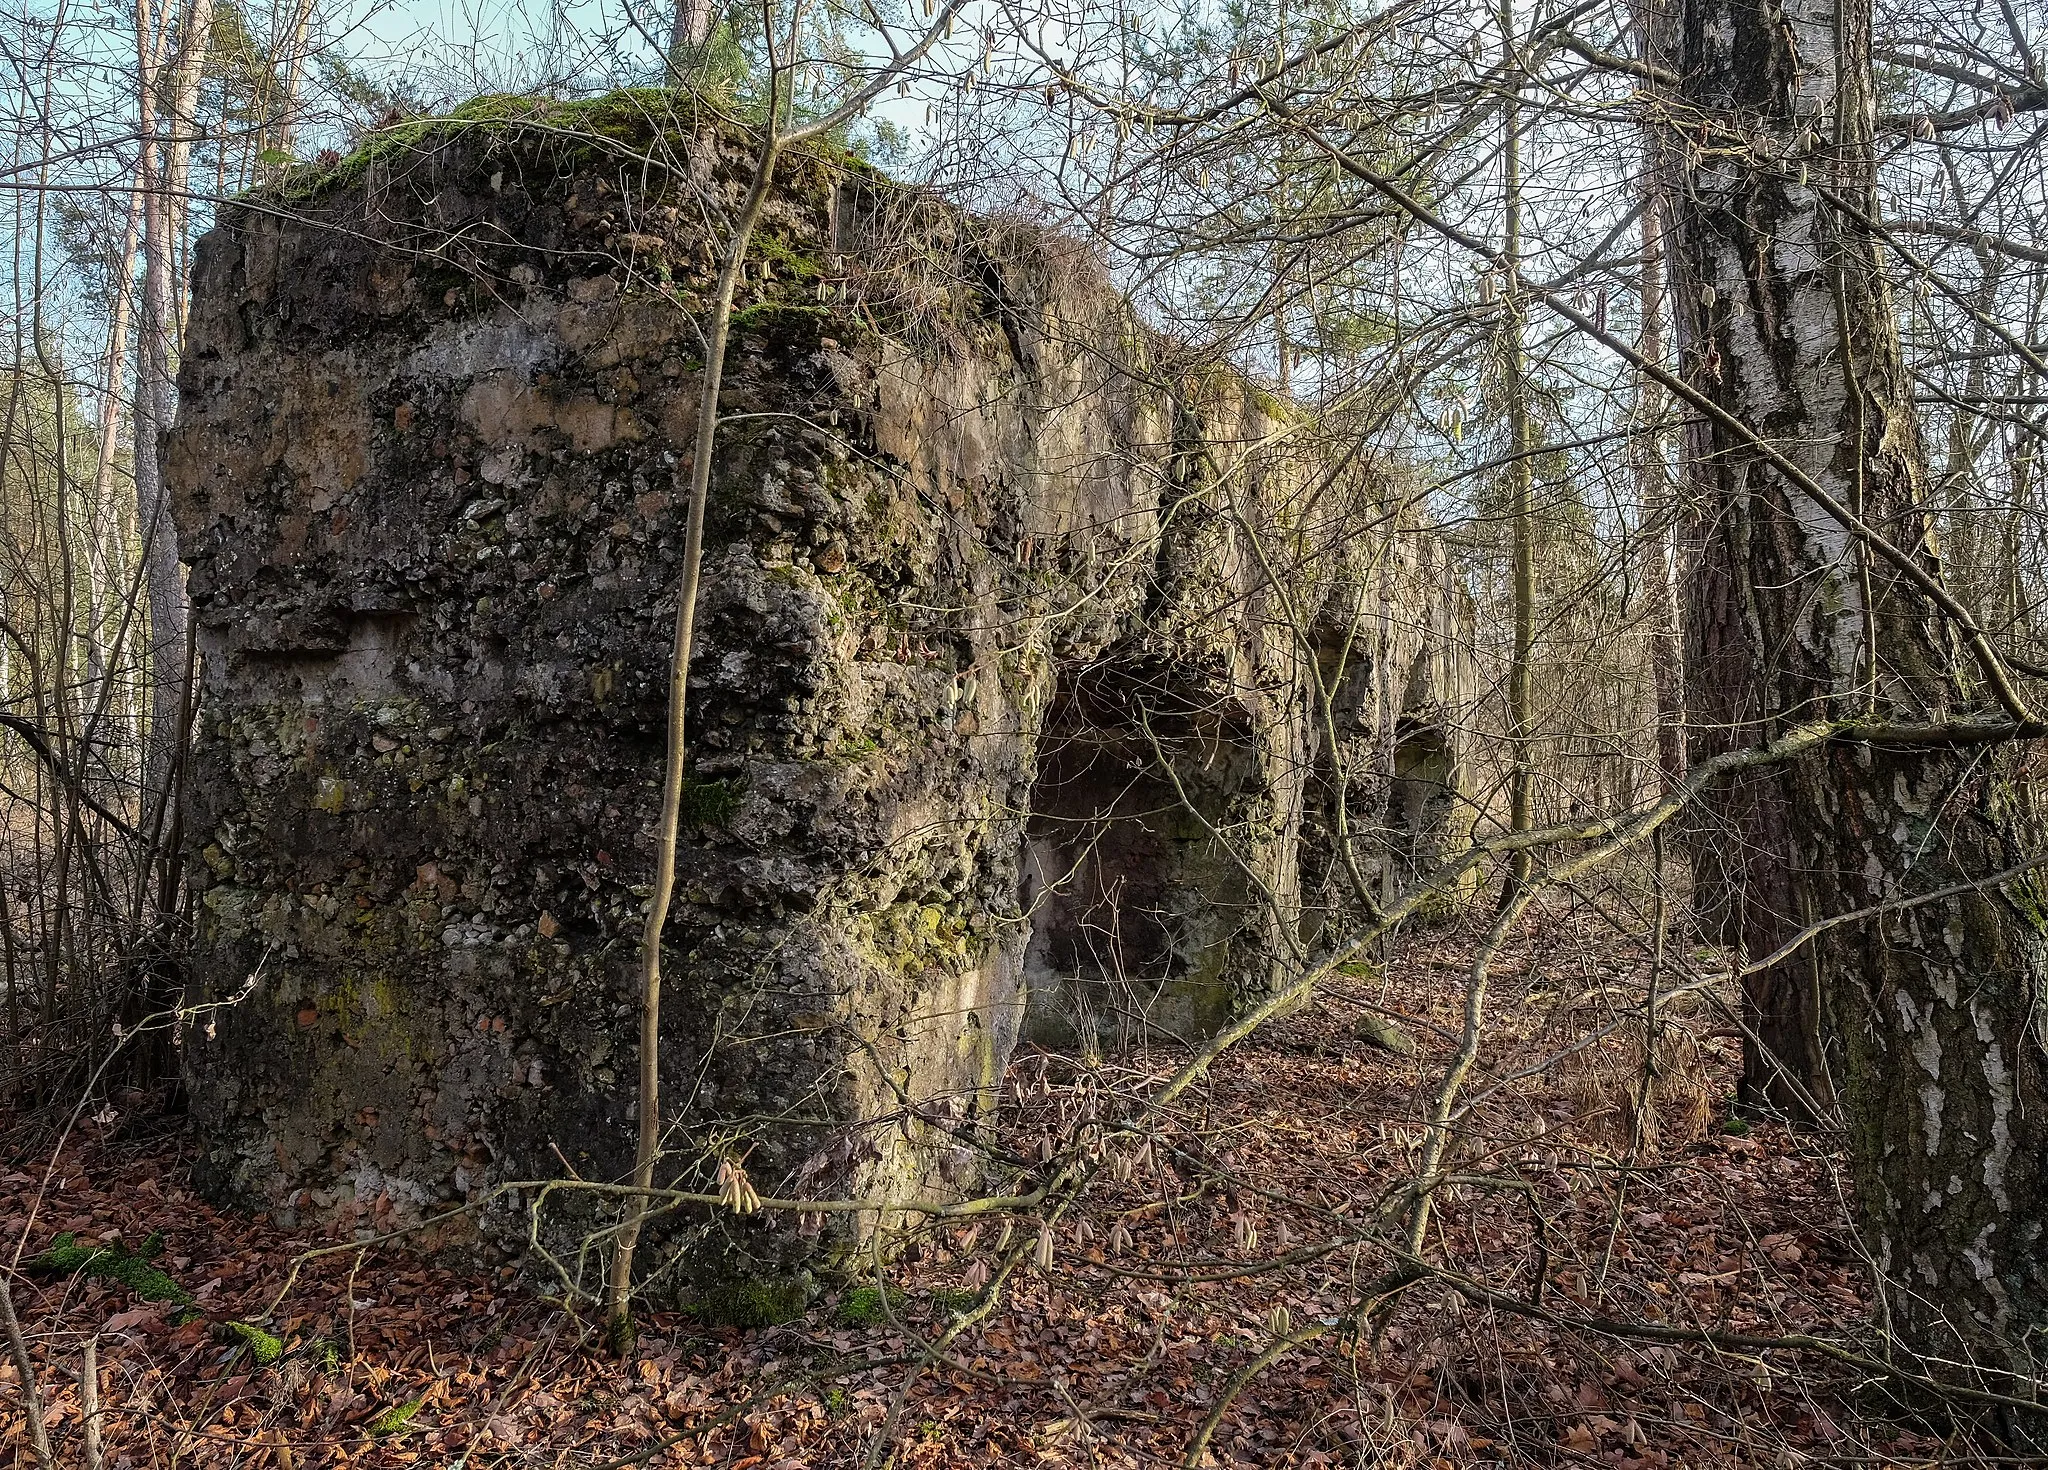 Photo showing: Ruins of processing plant foundation of the former lead mine Bleierzgrube Vesuv, Freihung-Elbart, district Amberg-Sulzbach, Bavaria, Germany